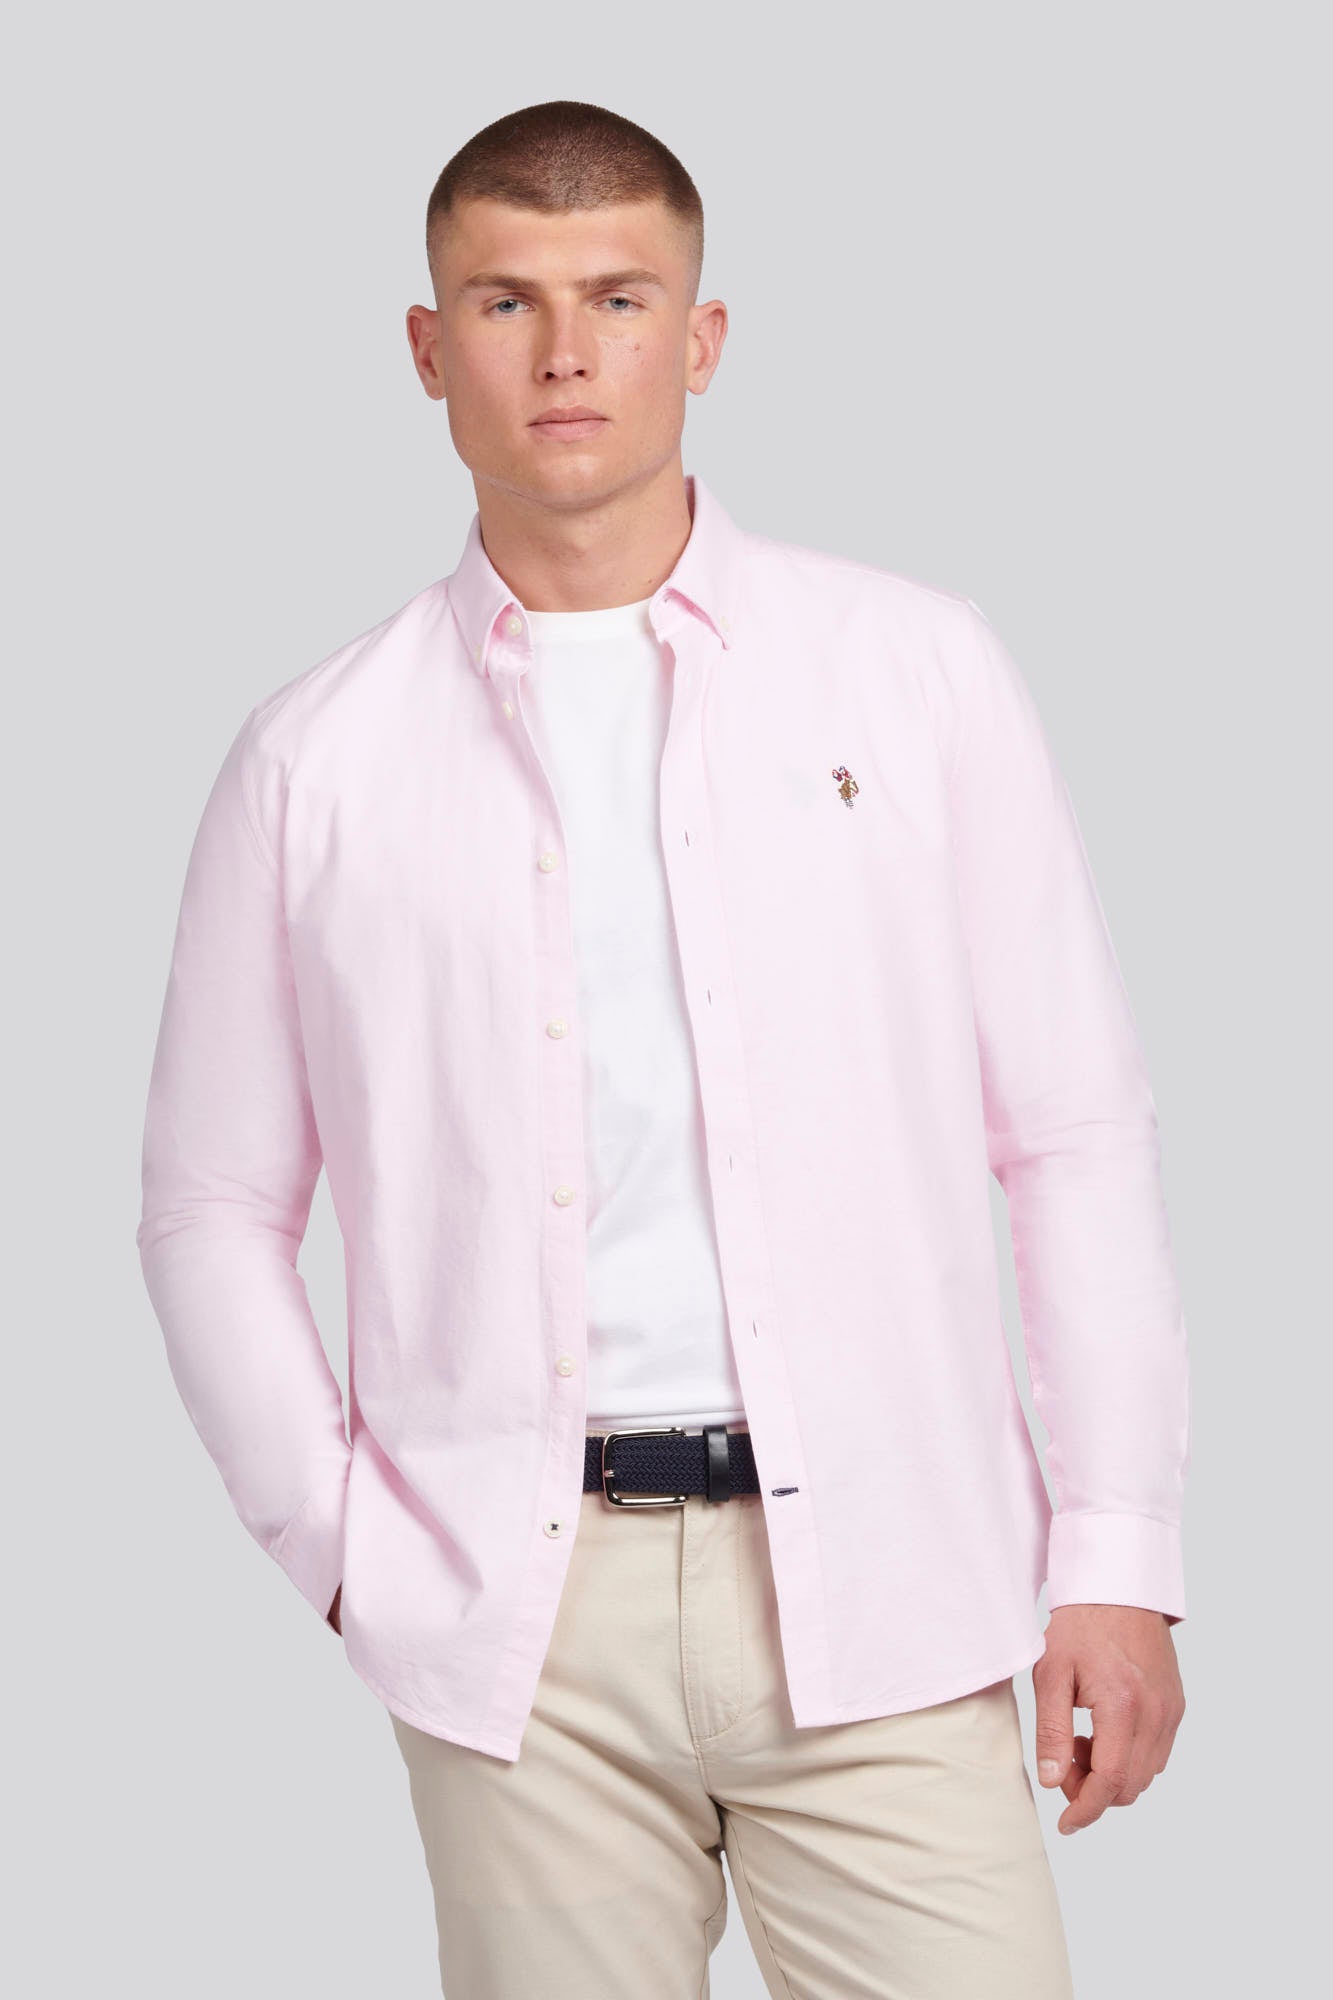 U.S. Polo Assn. Mens Peached Oxford Shirt in Orchid Pink